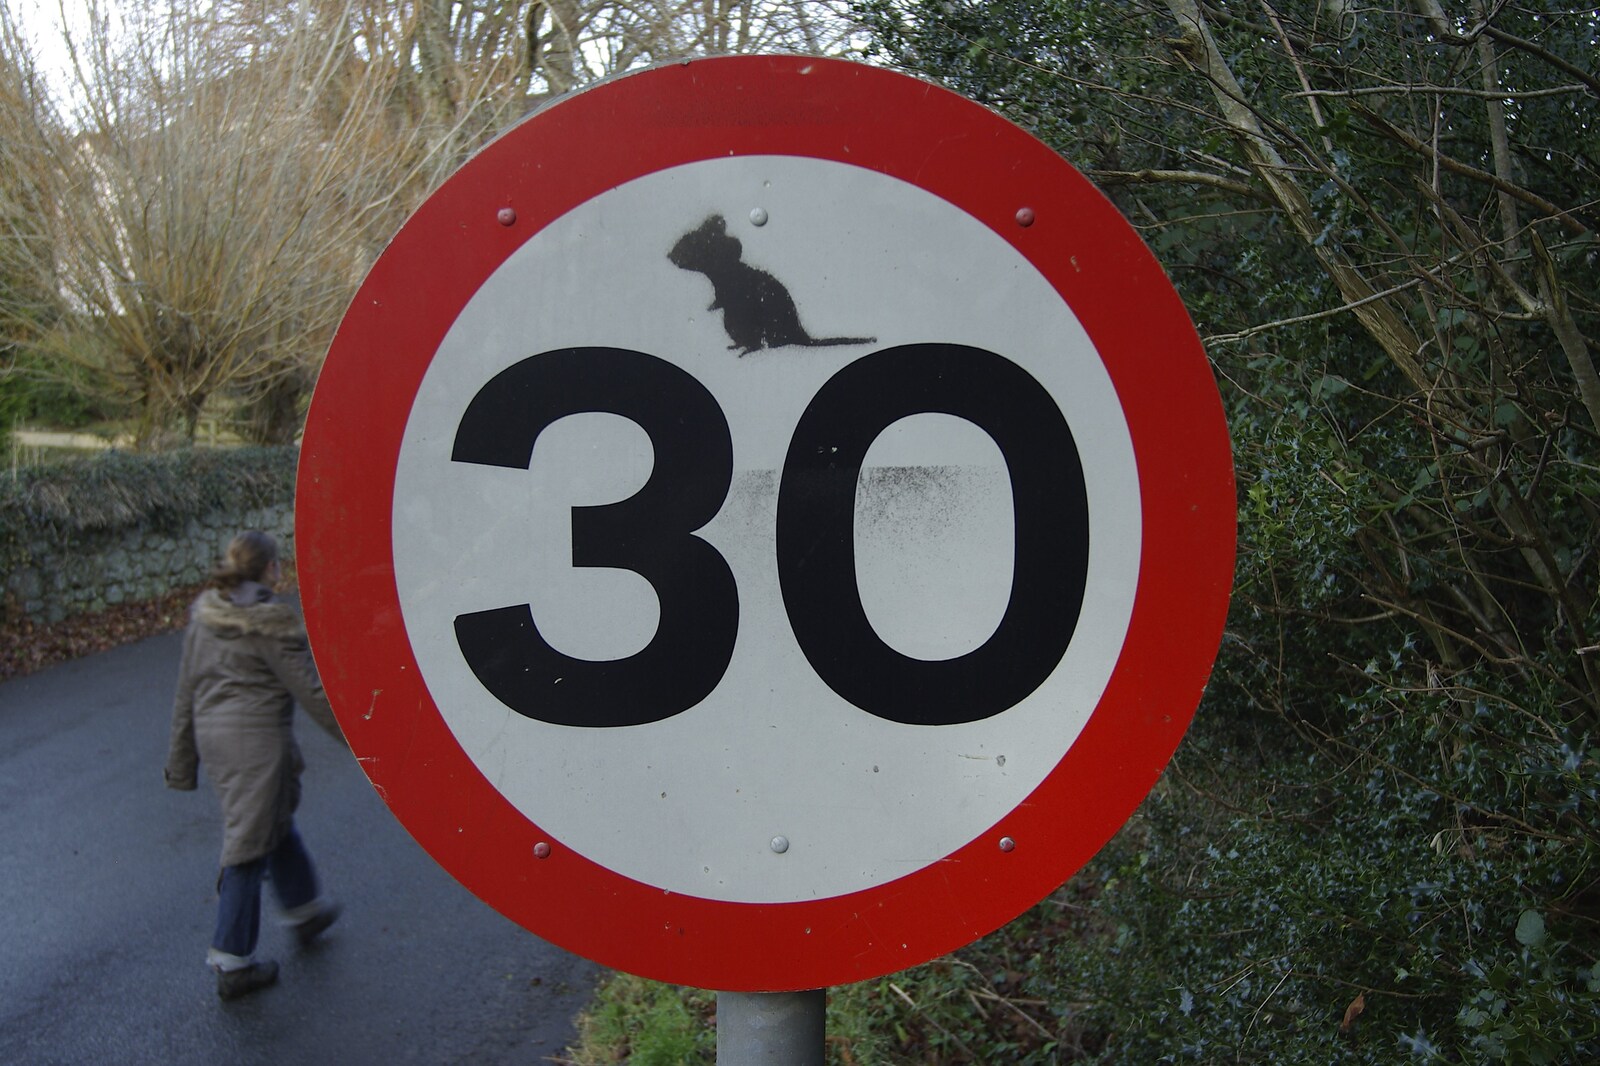 Someone has decorated a 30mph sign from Matt's Allotment and Meldon Hill, Chagford, Devon - 26th December 2007